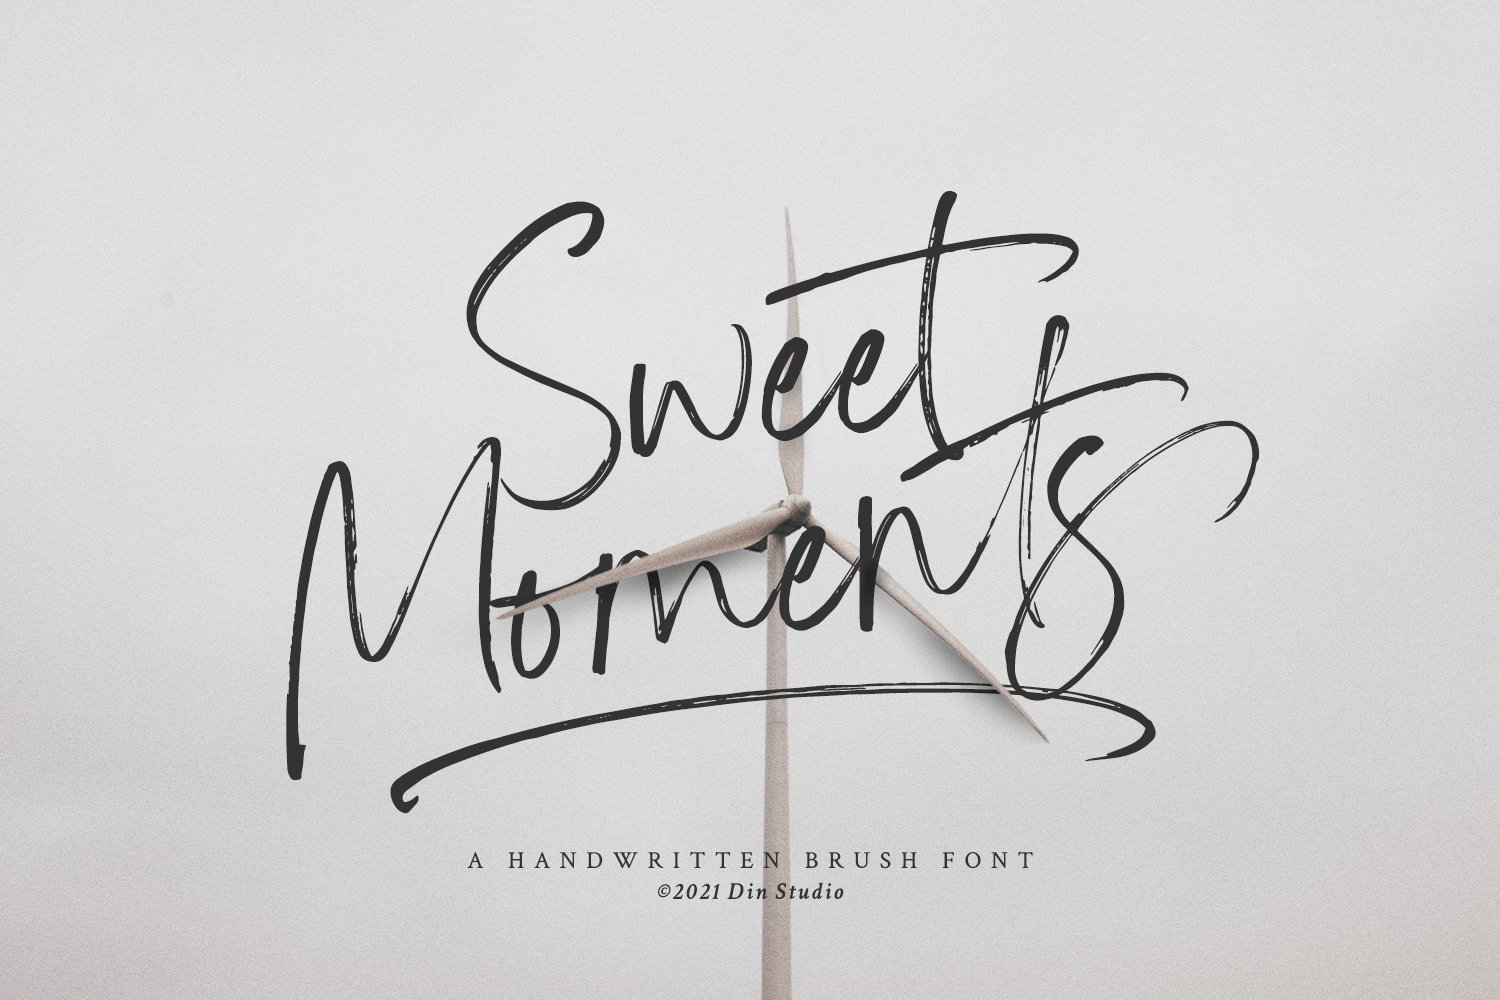 Sweet Moments cover image.